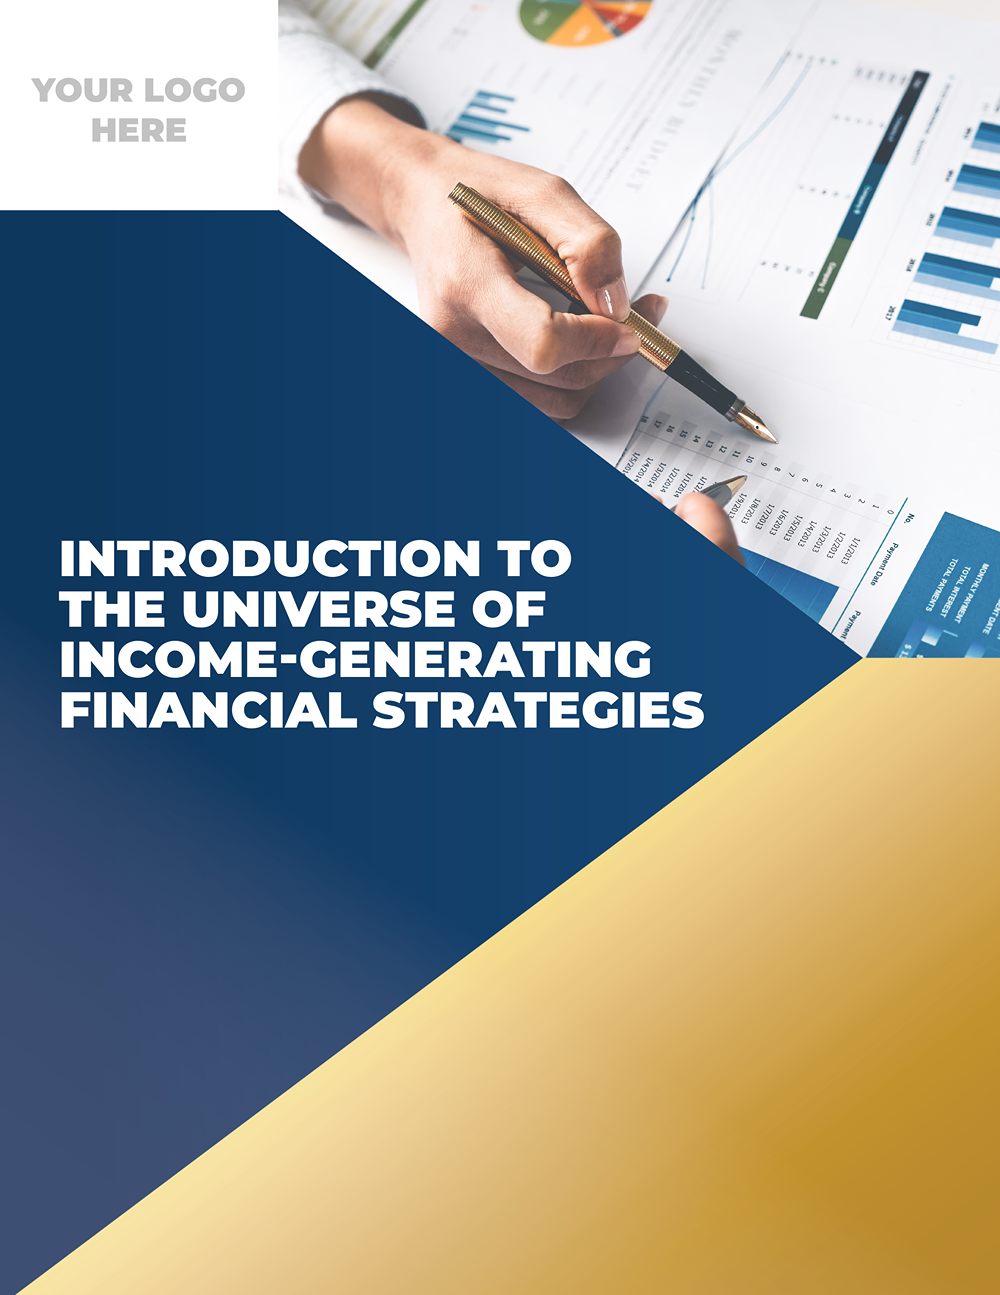 Introduction to the Universe of Income-Generating Financial Strategies